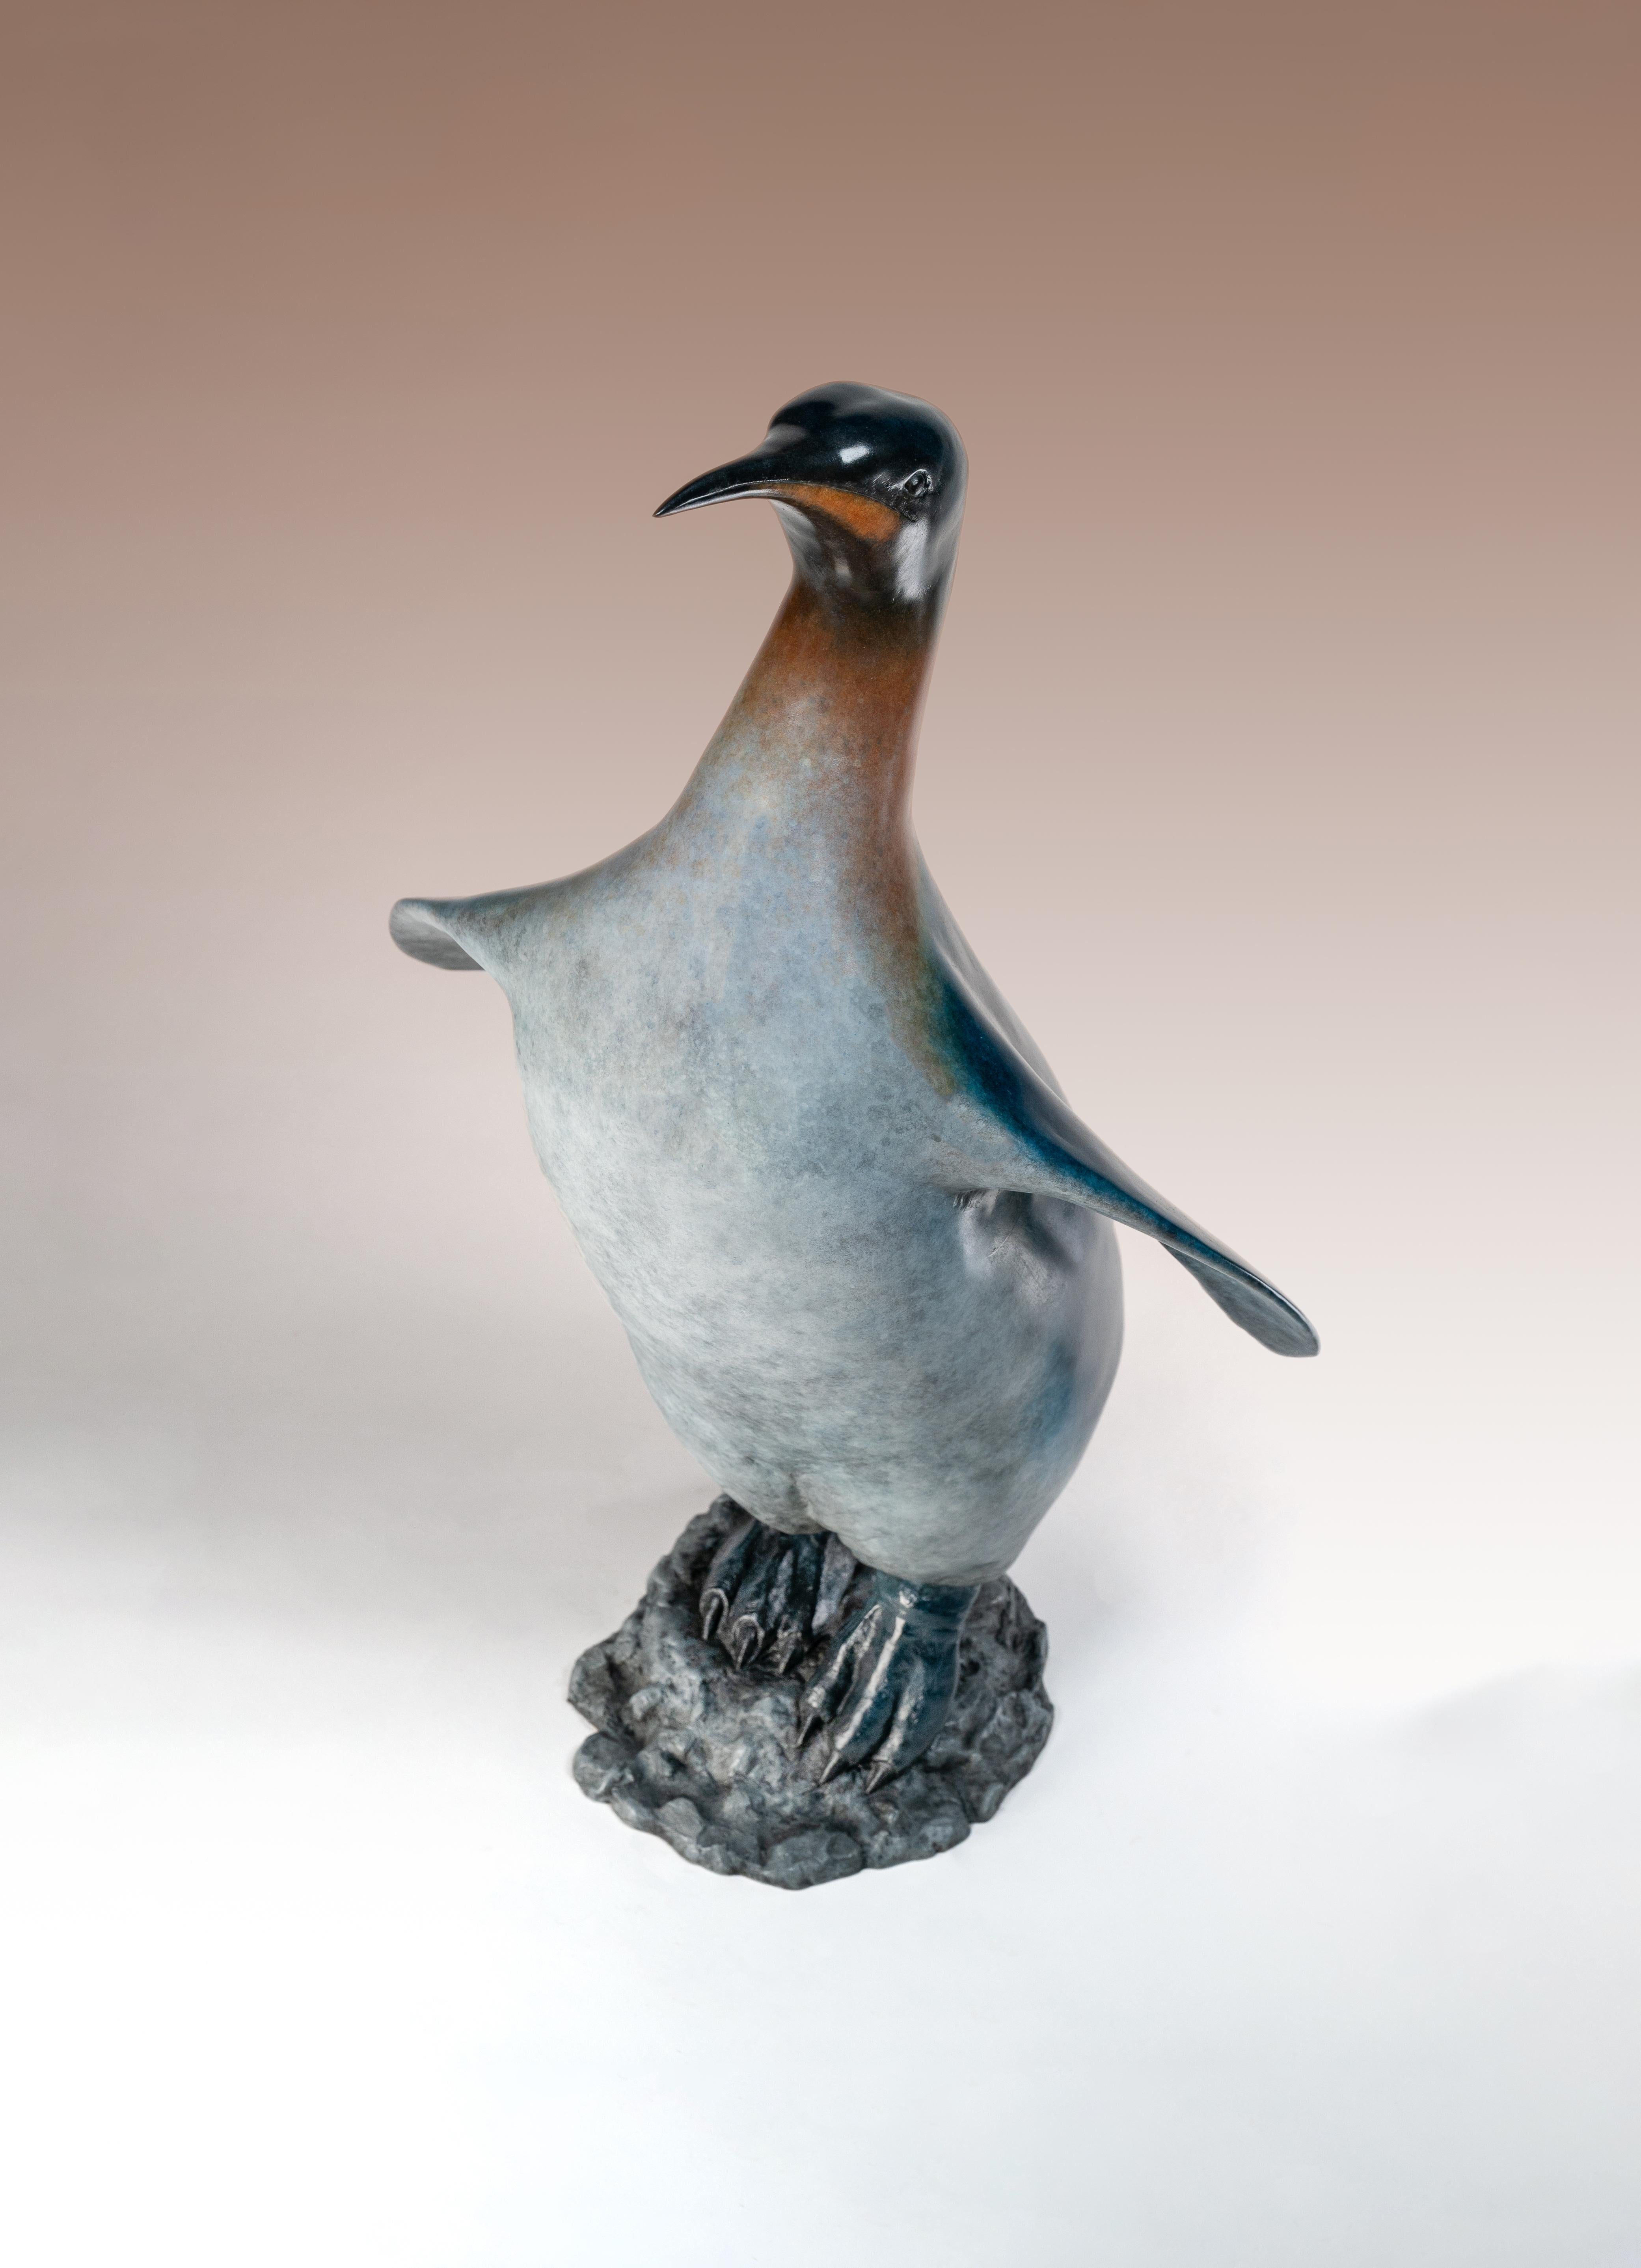 'King Penguin' by Tobias Martin is a Solid Bronze Animal Sculpture of a king penguin on rocks, white, vivid blue and orange patina. 

Tobias Martin was born in 1972 in Wiltshire, 12 miles from Stonehenge. Influenced by his idyllic rural upbringing,